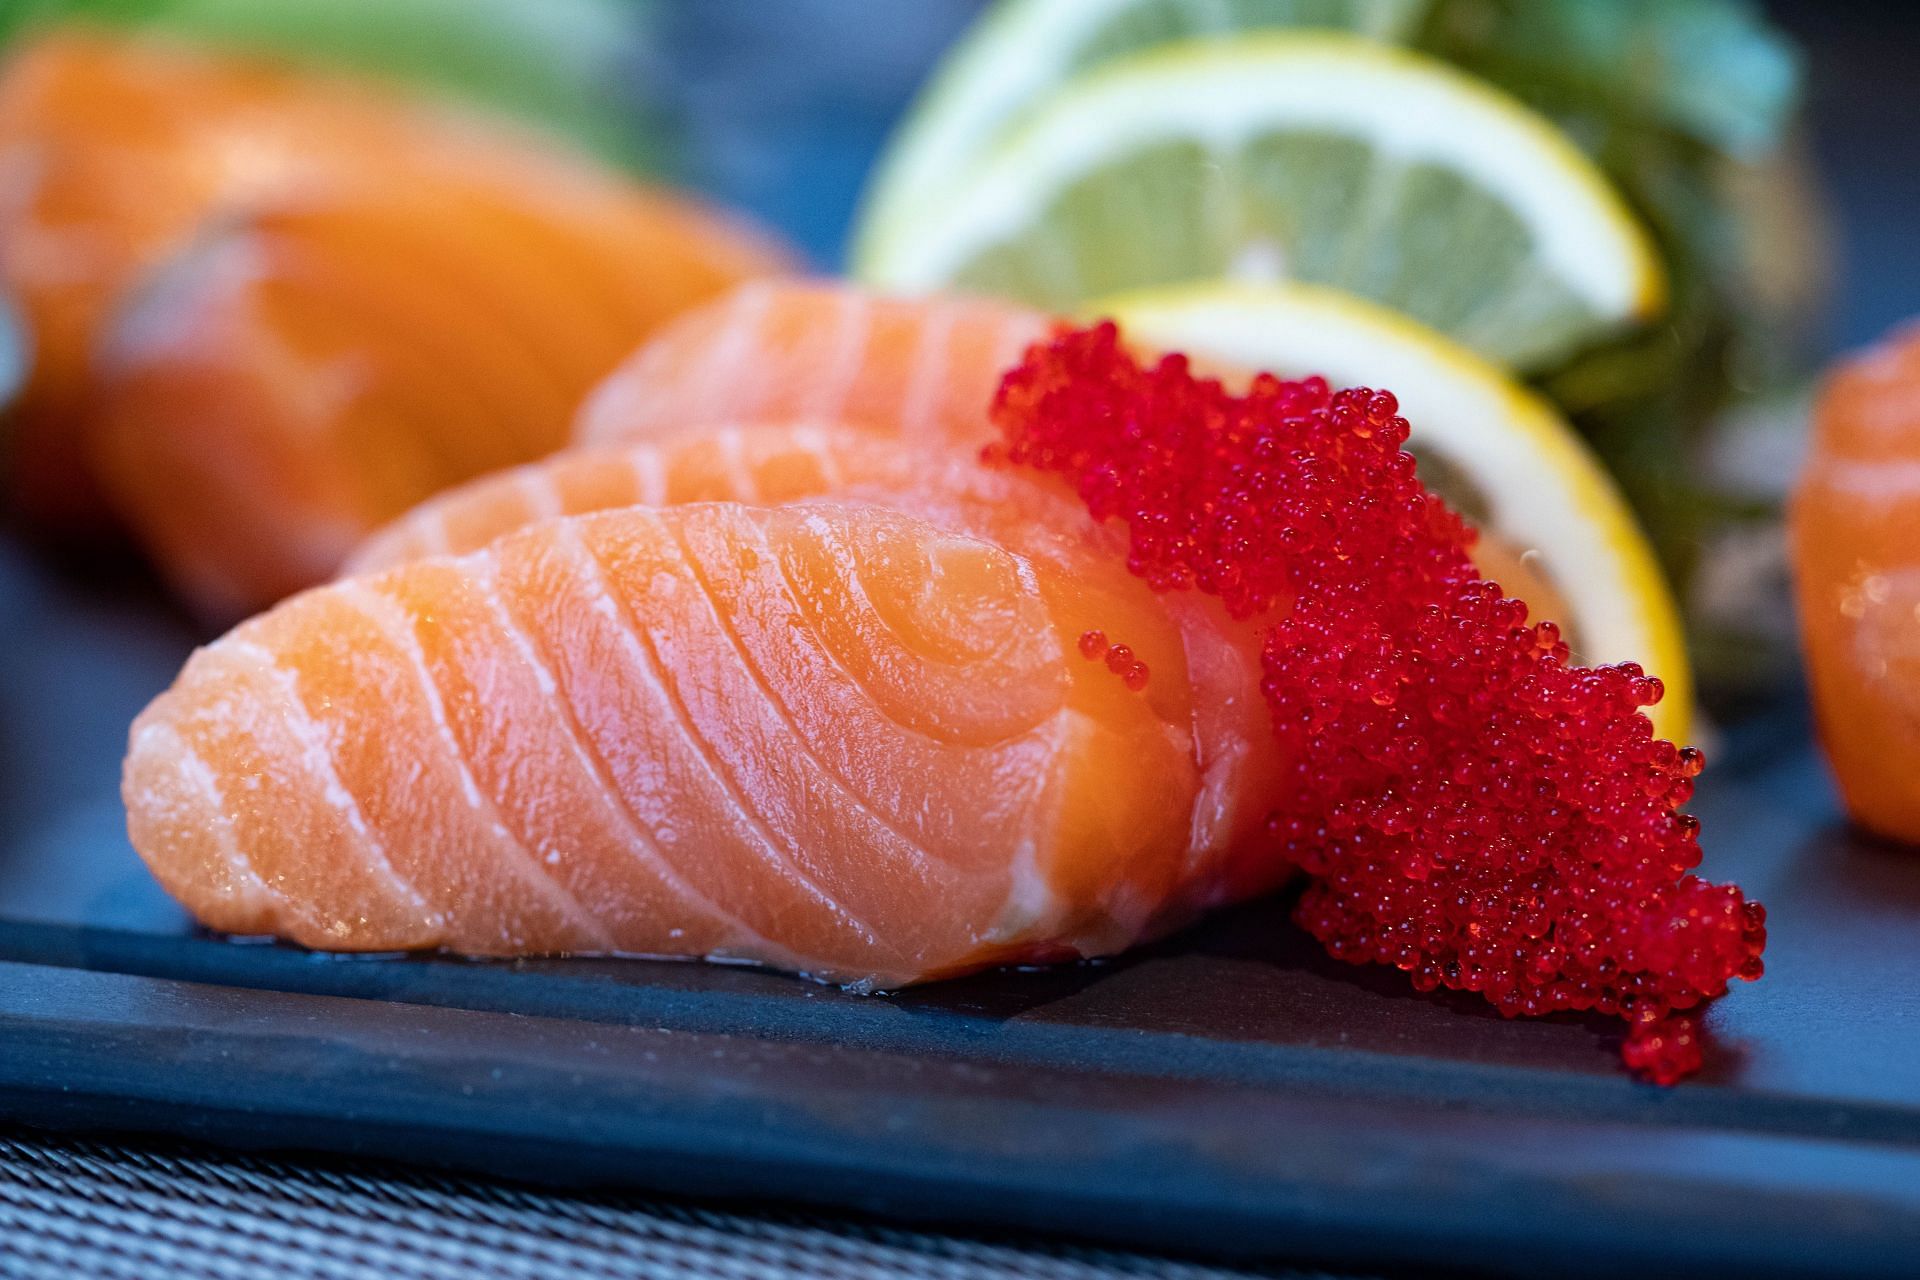 Salmon is a great source of vitamin D. (Image via Pexels)